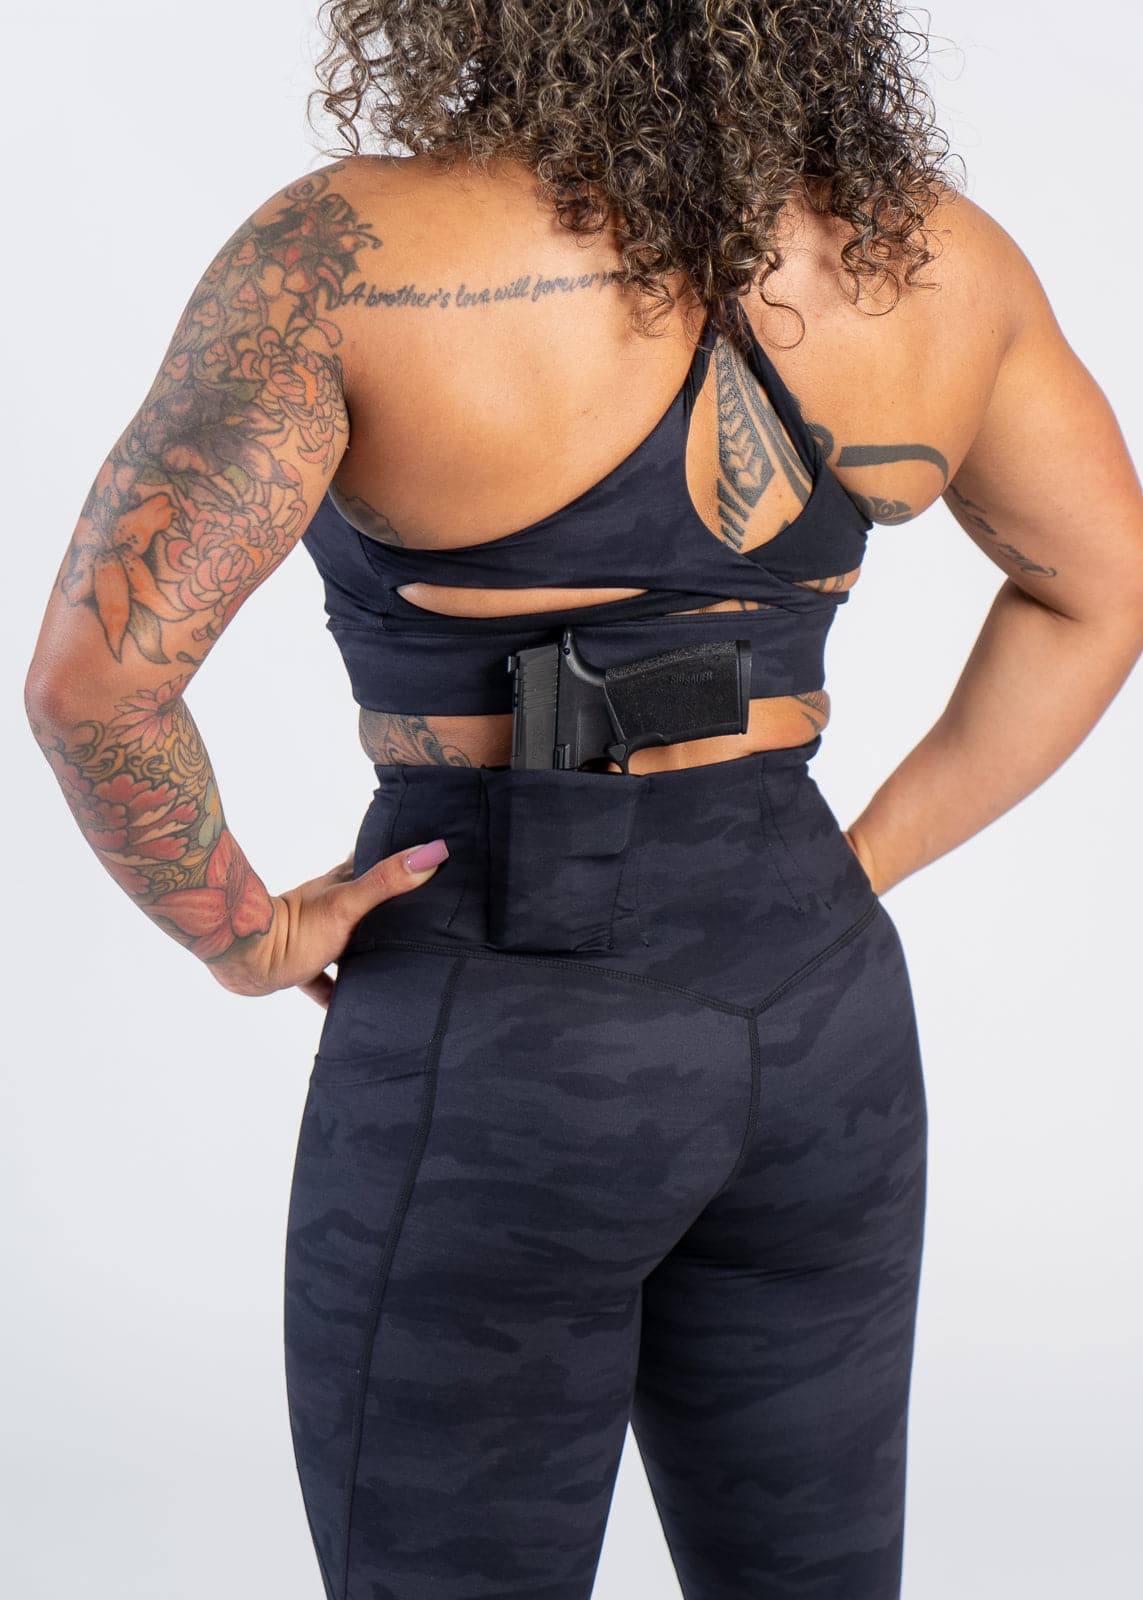 Concealed Carry Leggings With Pockets - Shoulders Down Back View with Hands on Hips | Black Camo